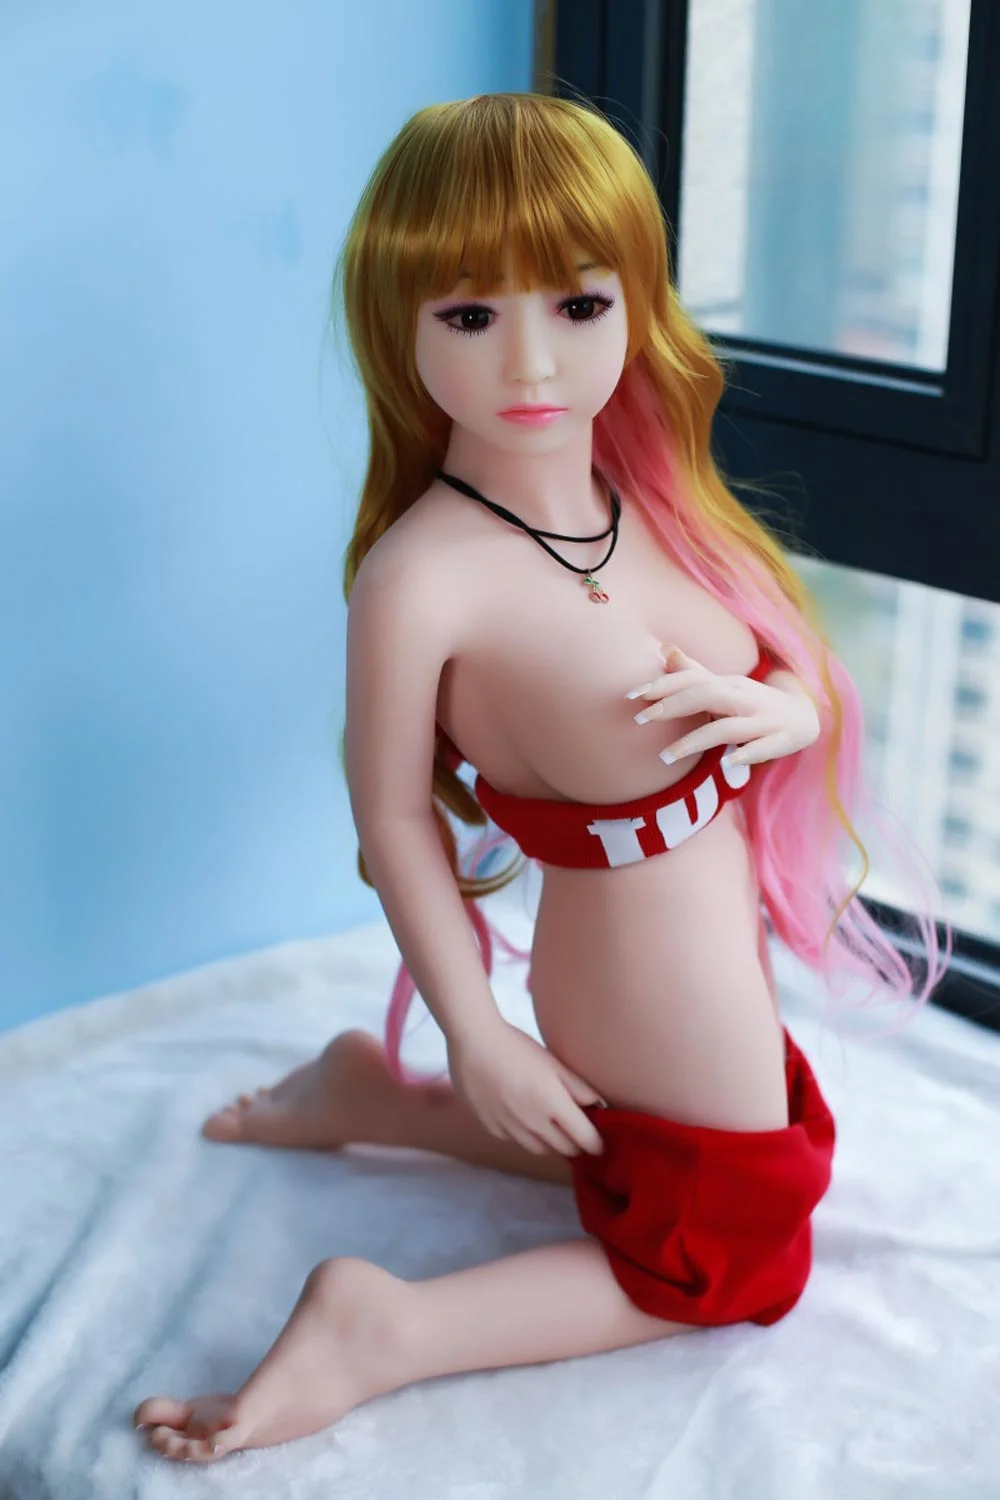 Mini sex doll with legs kneeling on the bed